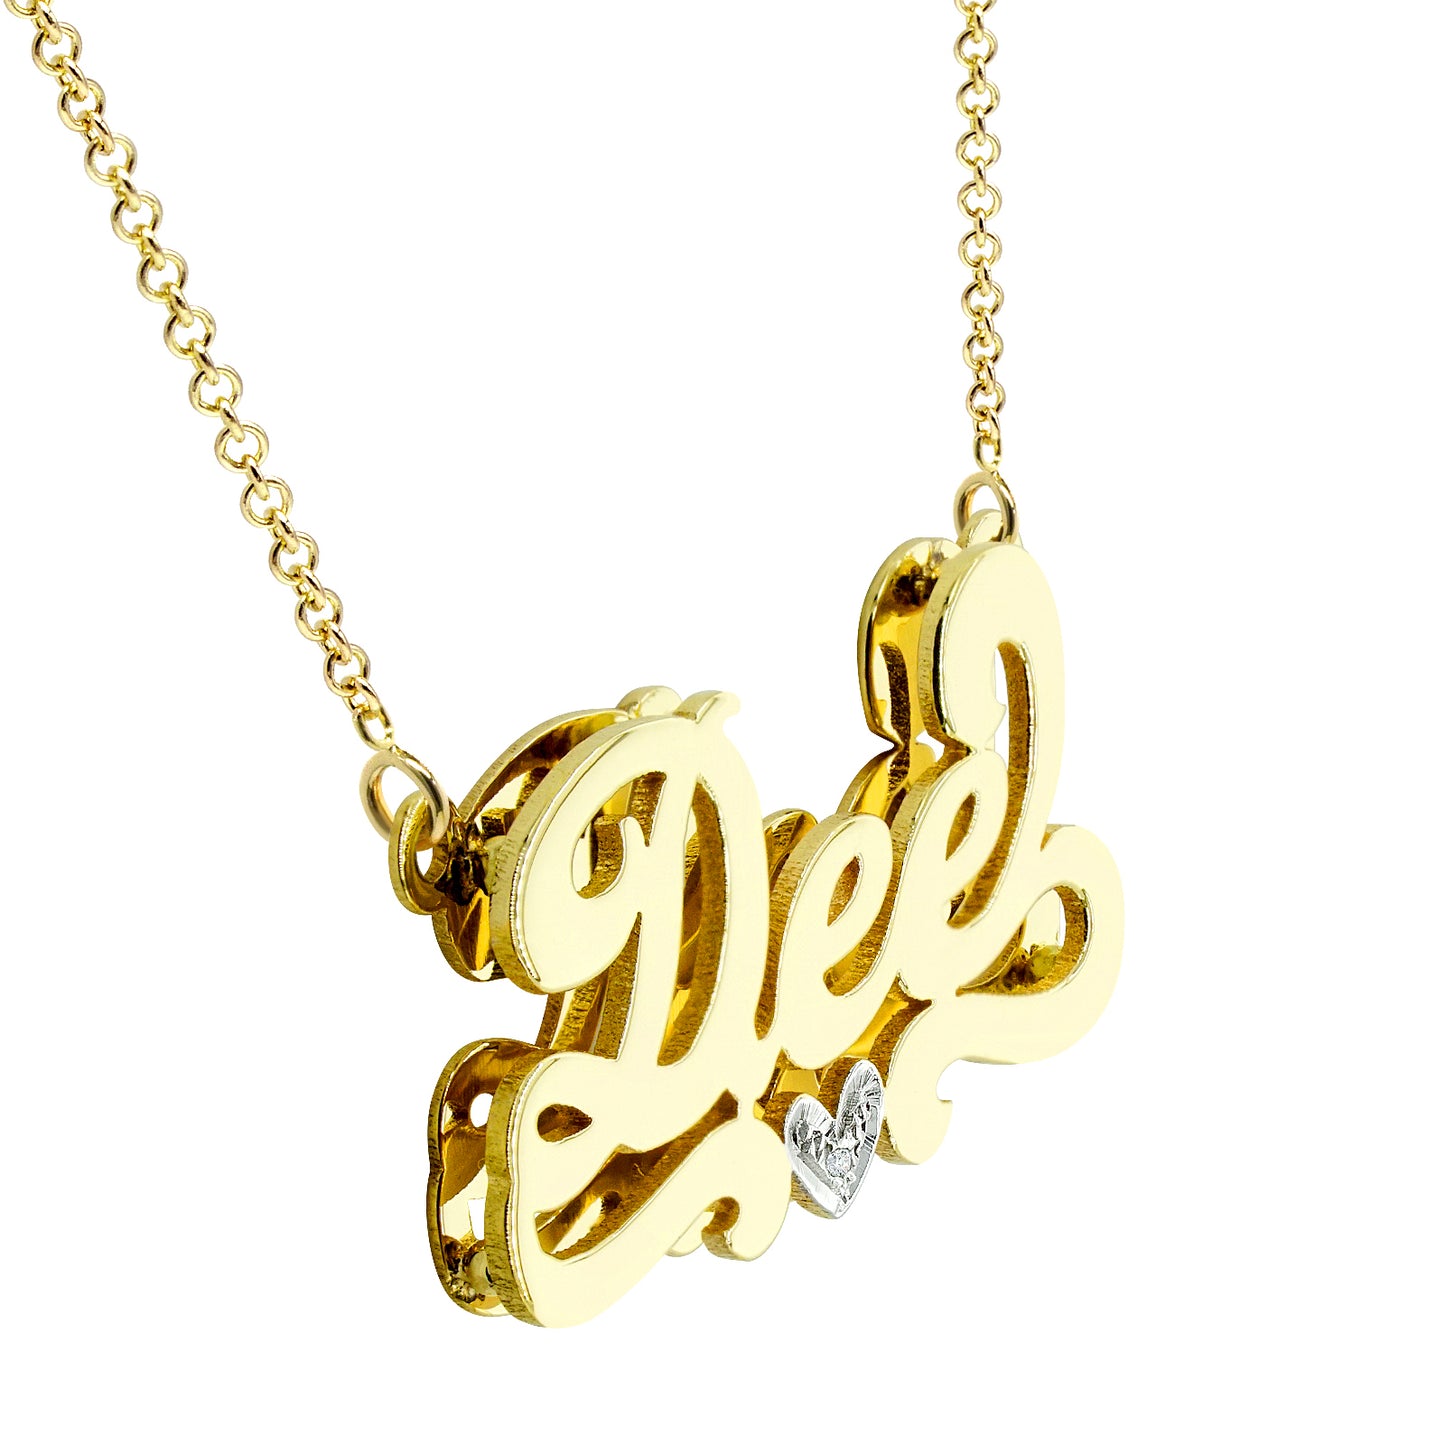 Personalized 14kt. Gold Name Plate Necklace with Diamond